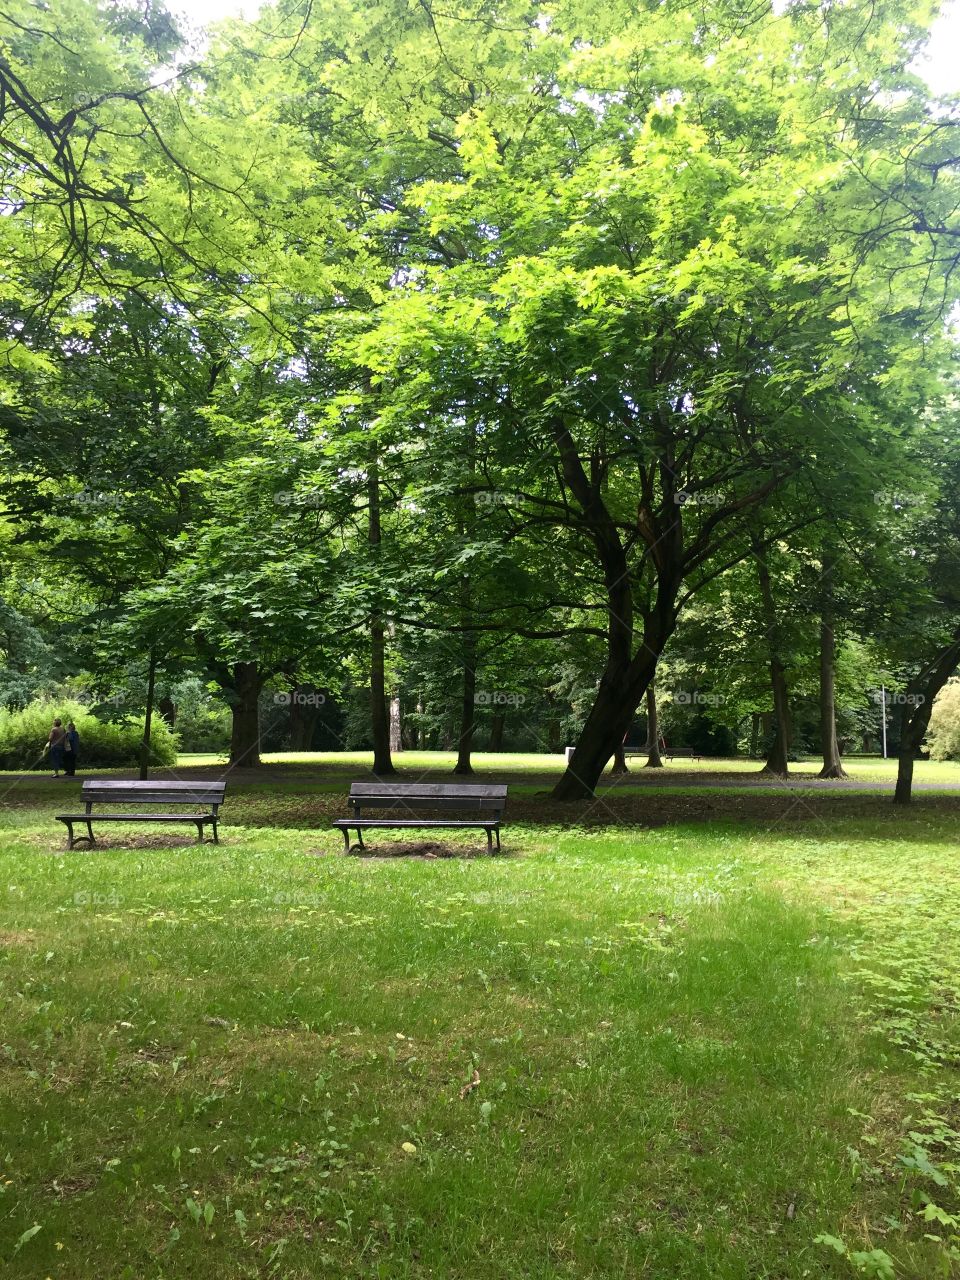 A green park and two dark benches